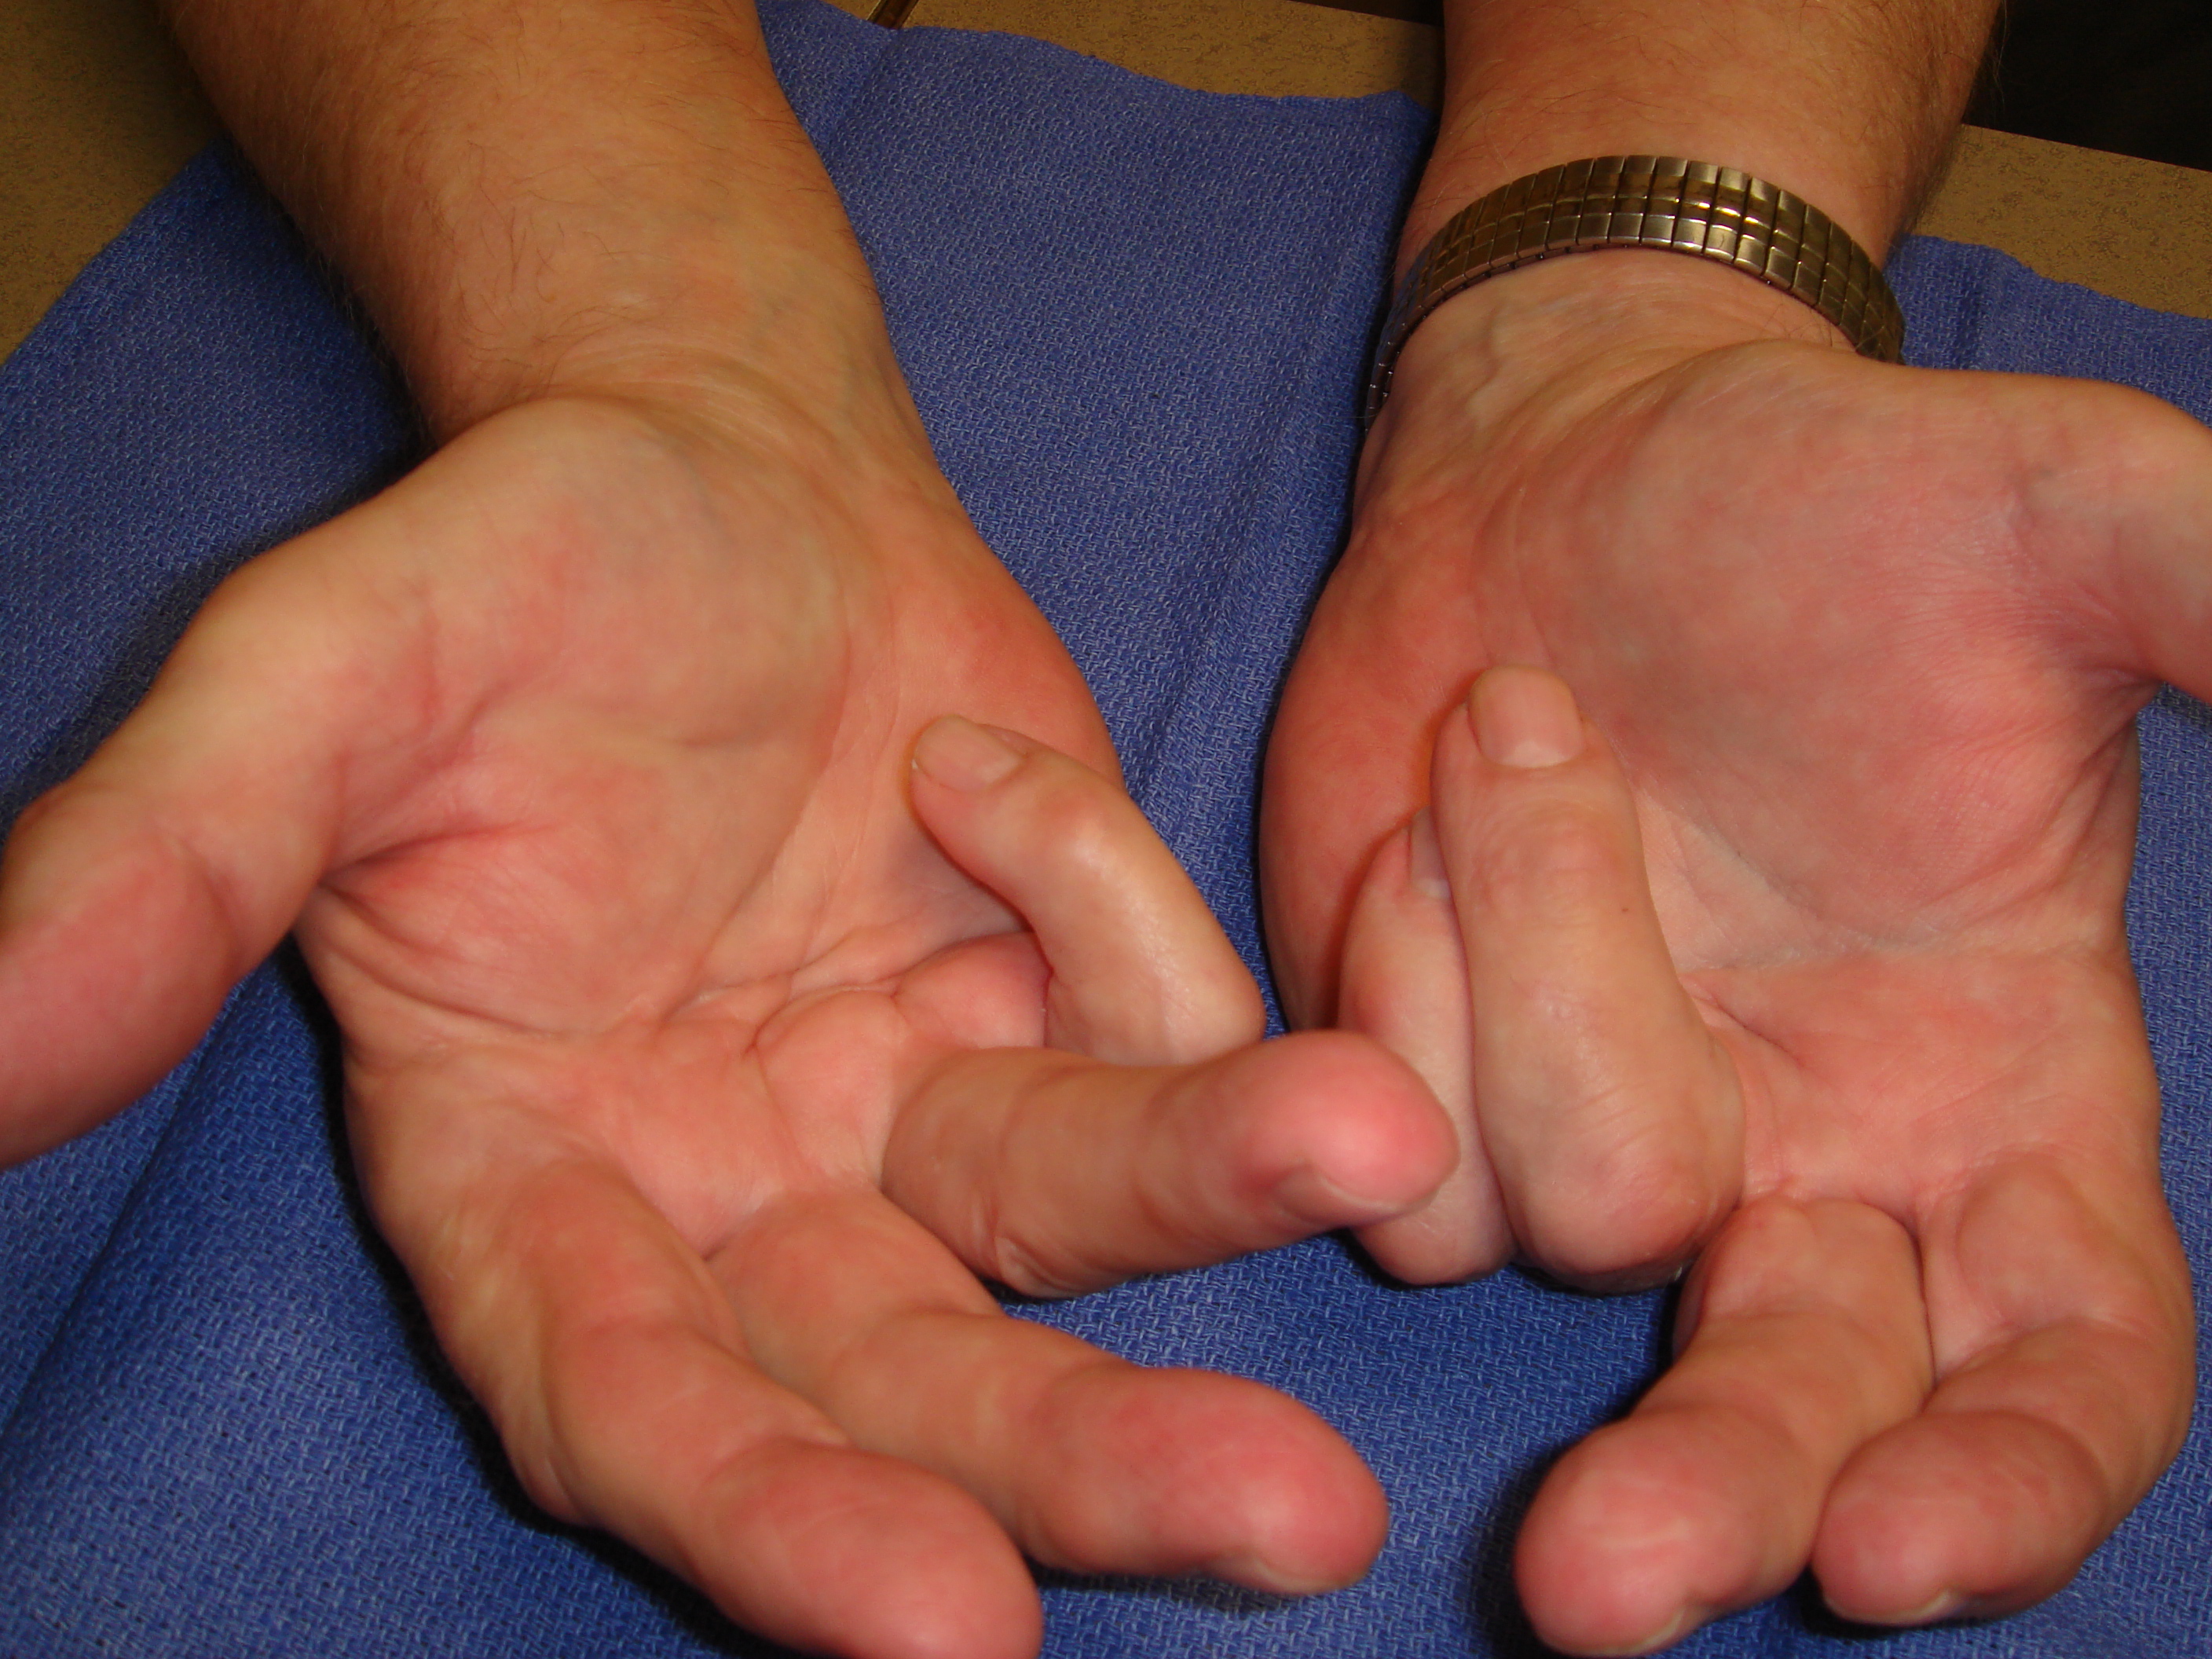 Figure 7a: This 75-year-old man presented with bilateral fourth and fifth ray recurrences of Dupuytren’s contractures 14 months after his second needle aponeurotomies in each hand. He had had the initial recurrences <9 months after the first procedures and recorded “excellent” corrections; the repeat needle aponeurotomies were also reported to have regained extension but also quickly recurred. He elected enzyme treatments beginning with his dominant right hand with the stated goal of being able to “hold my wife’s hand” again.